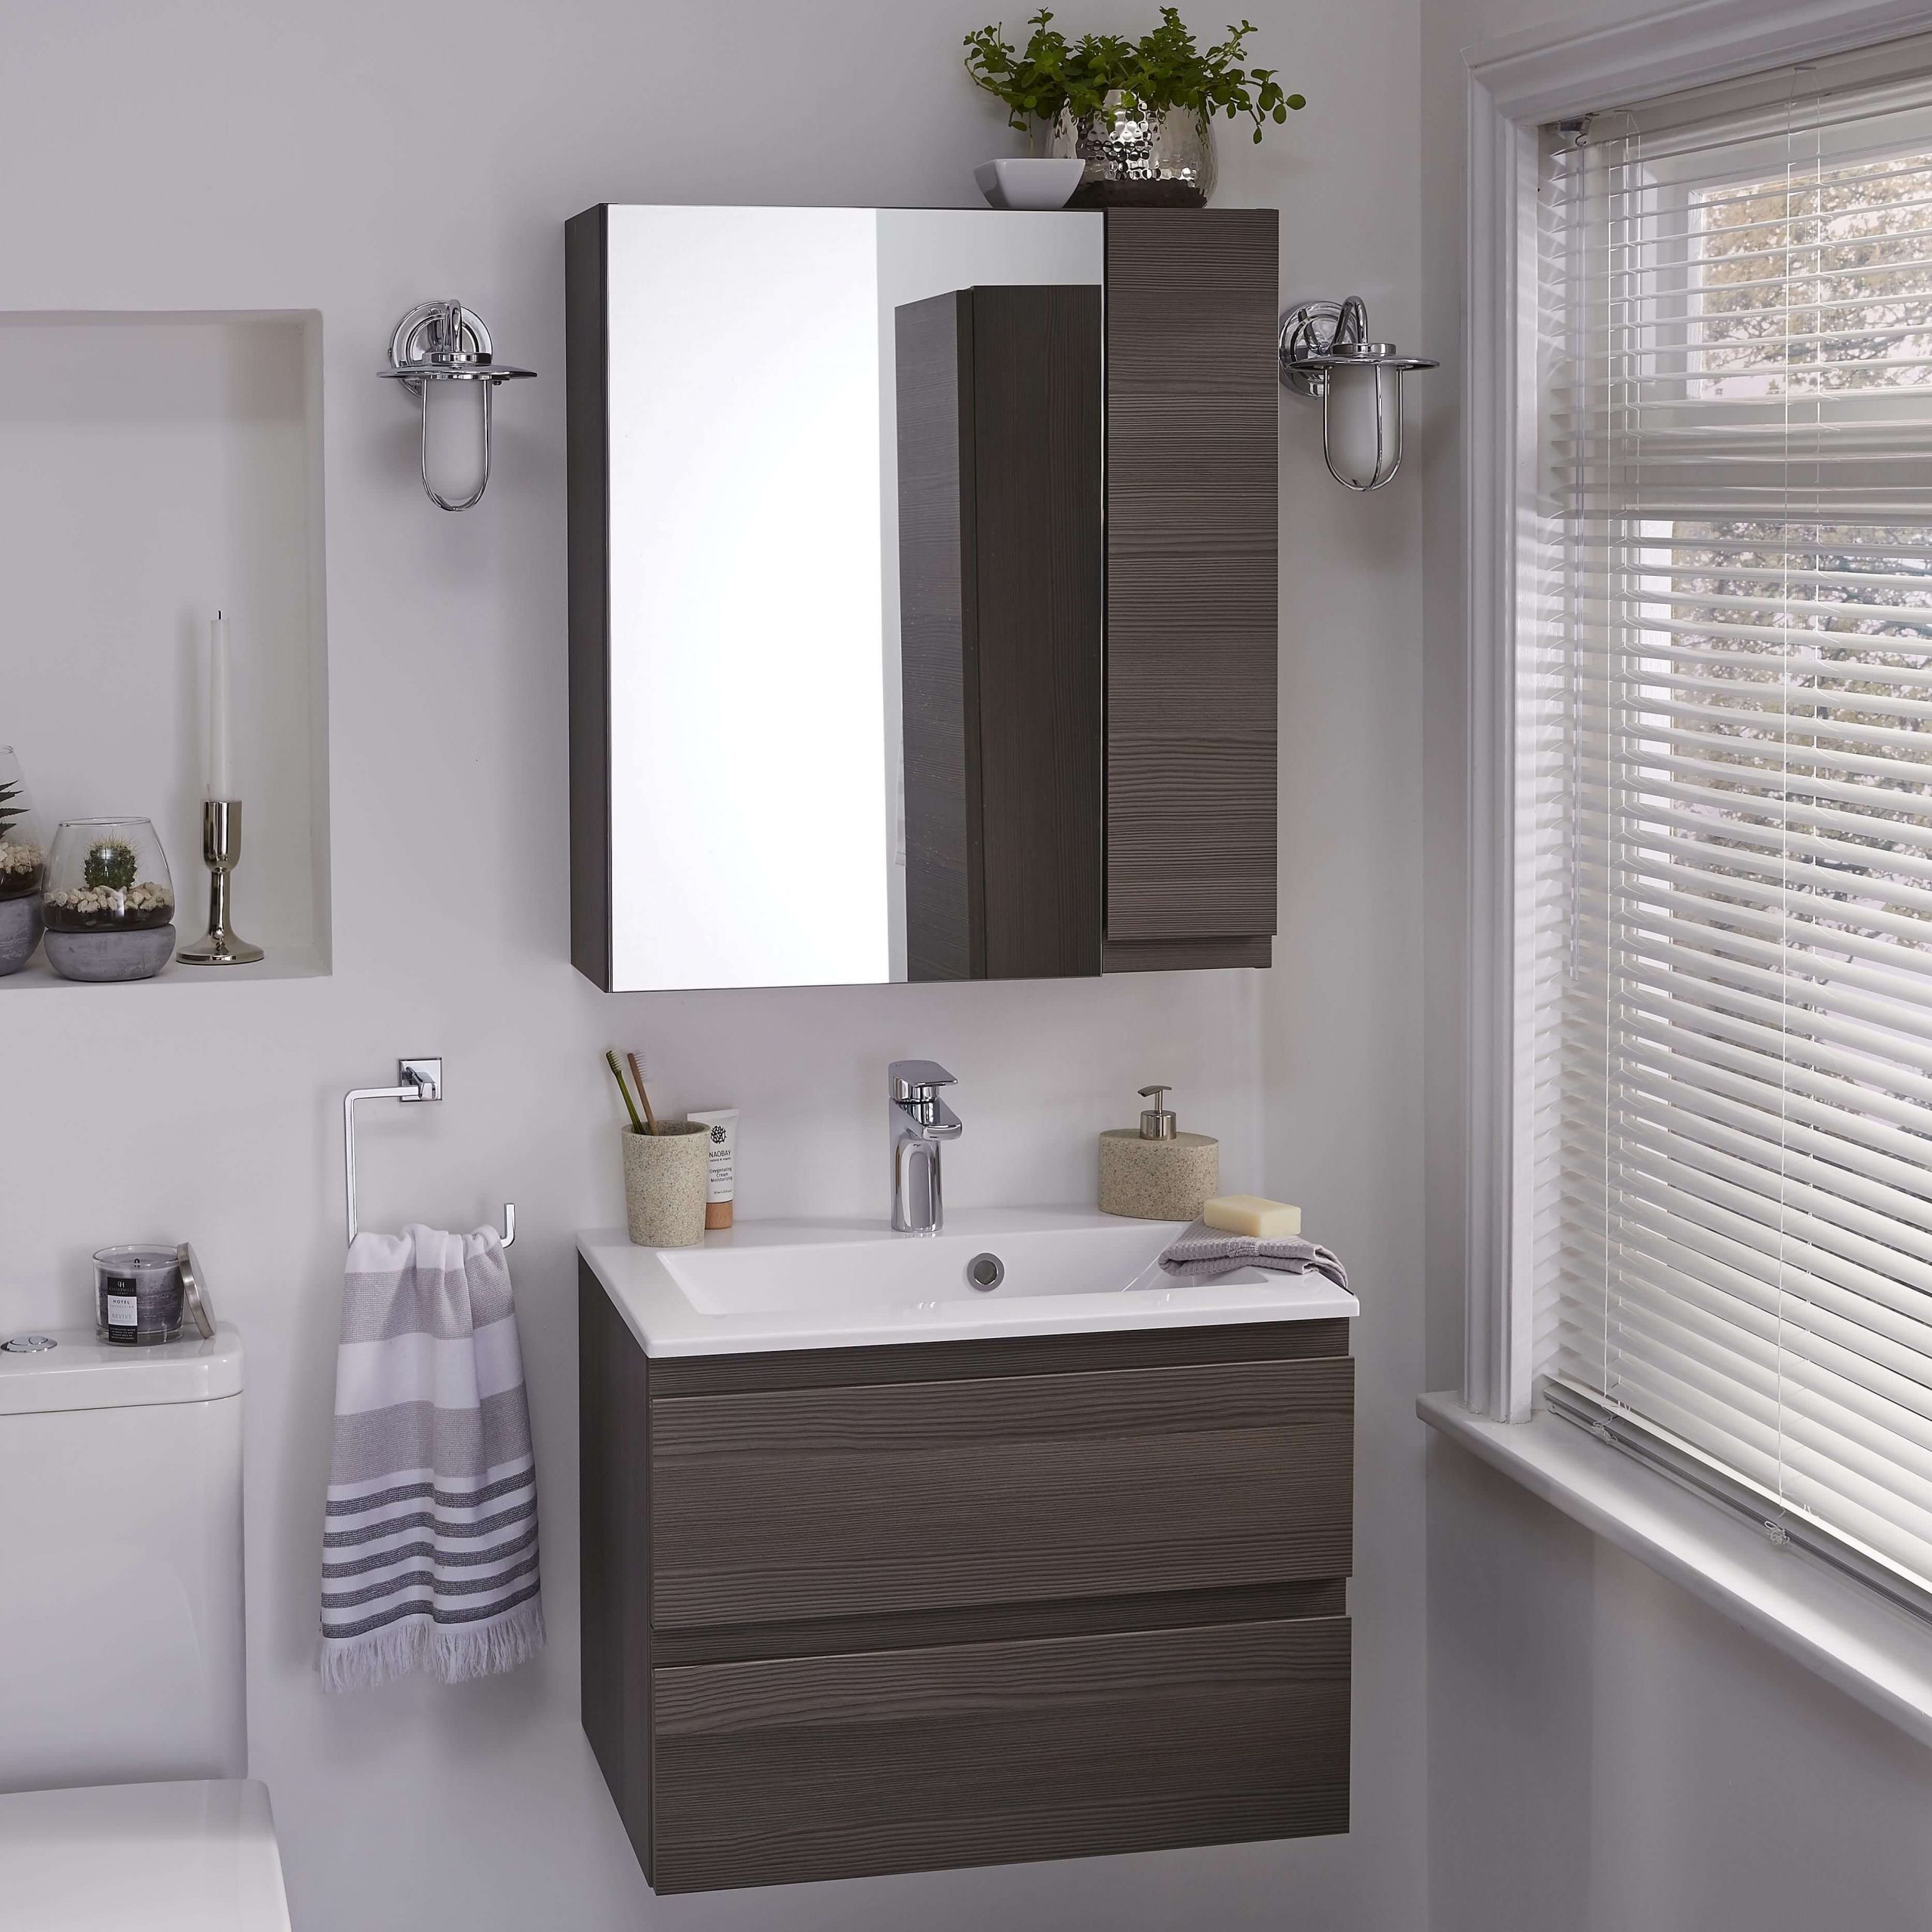 Small Bathroom Cabinet Best Of 15 Clever Small Bathroom Cabinet Ideas